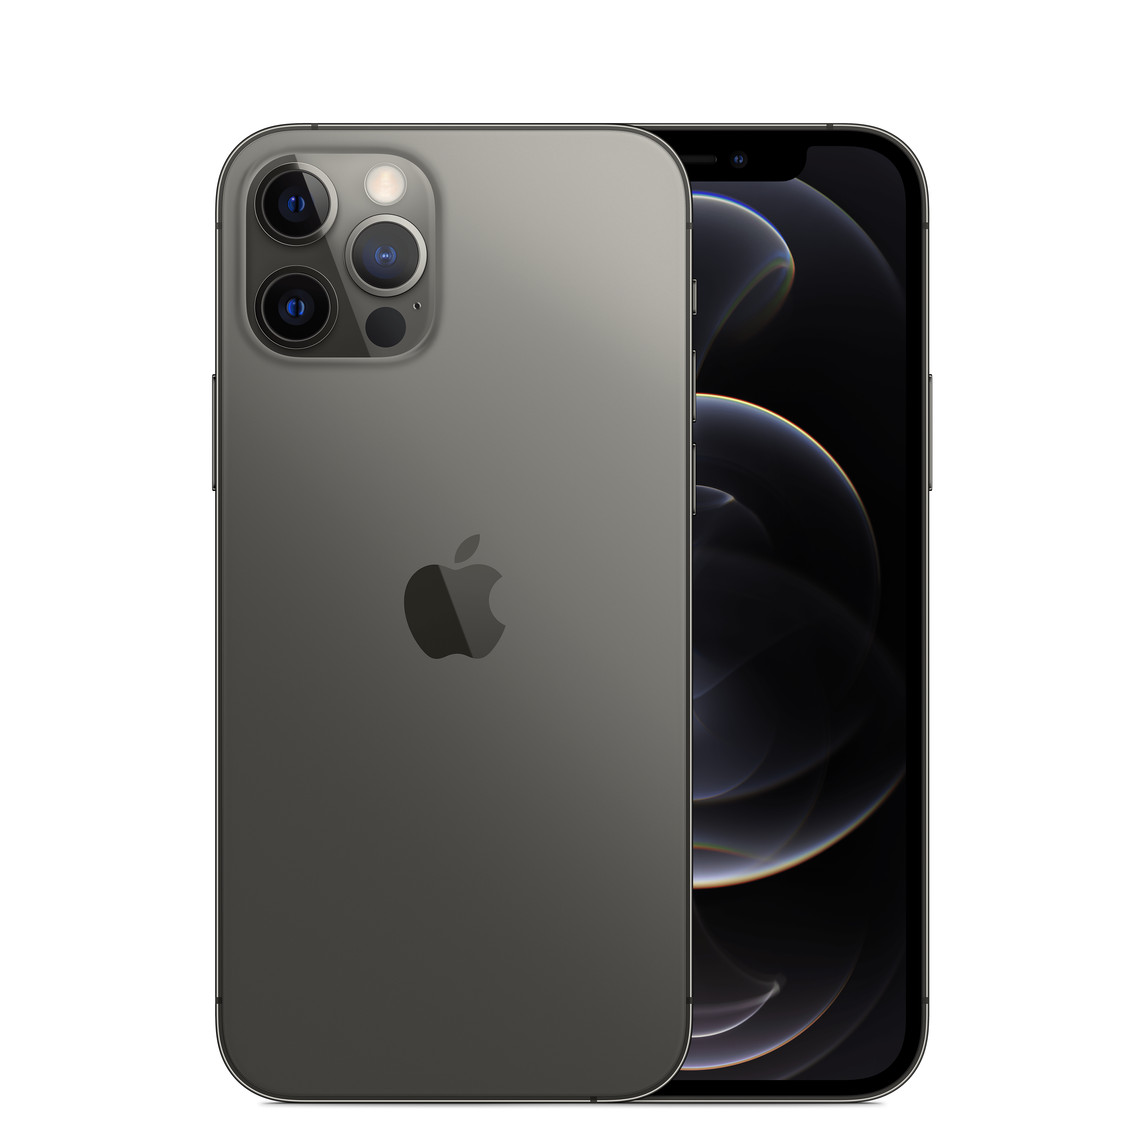 Graphite iPhone 12, Dual camera system with True Tone flash, centered Apple logo, front, all-screen display